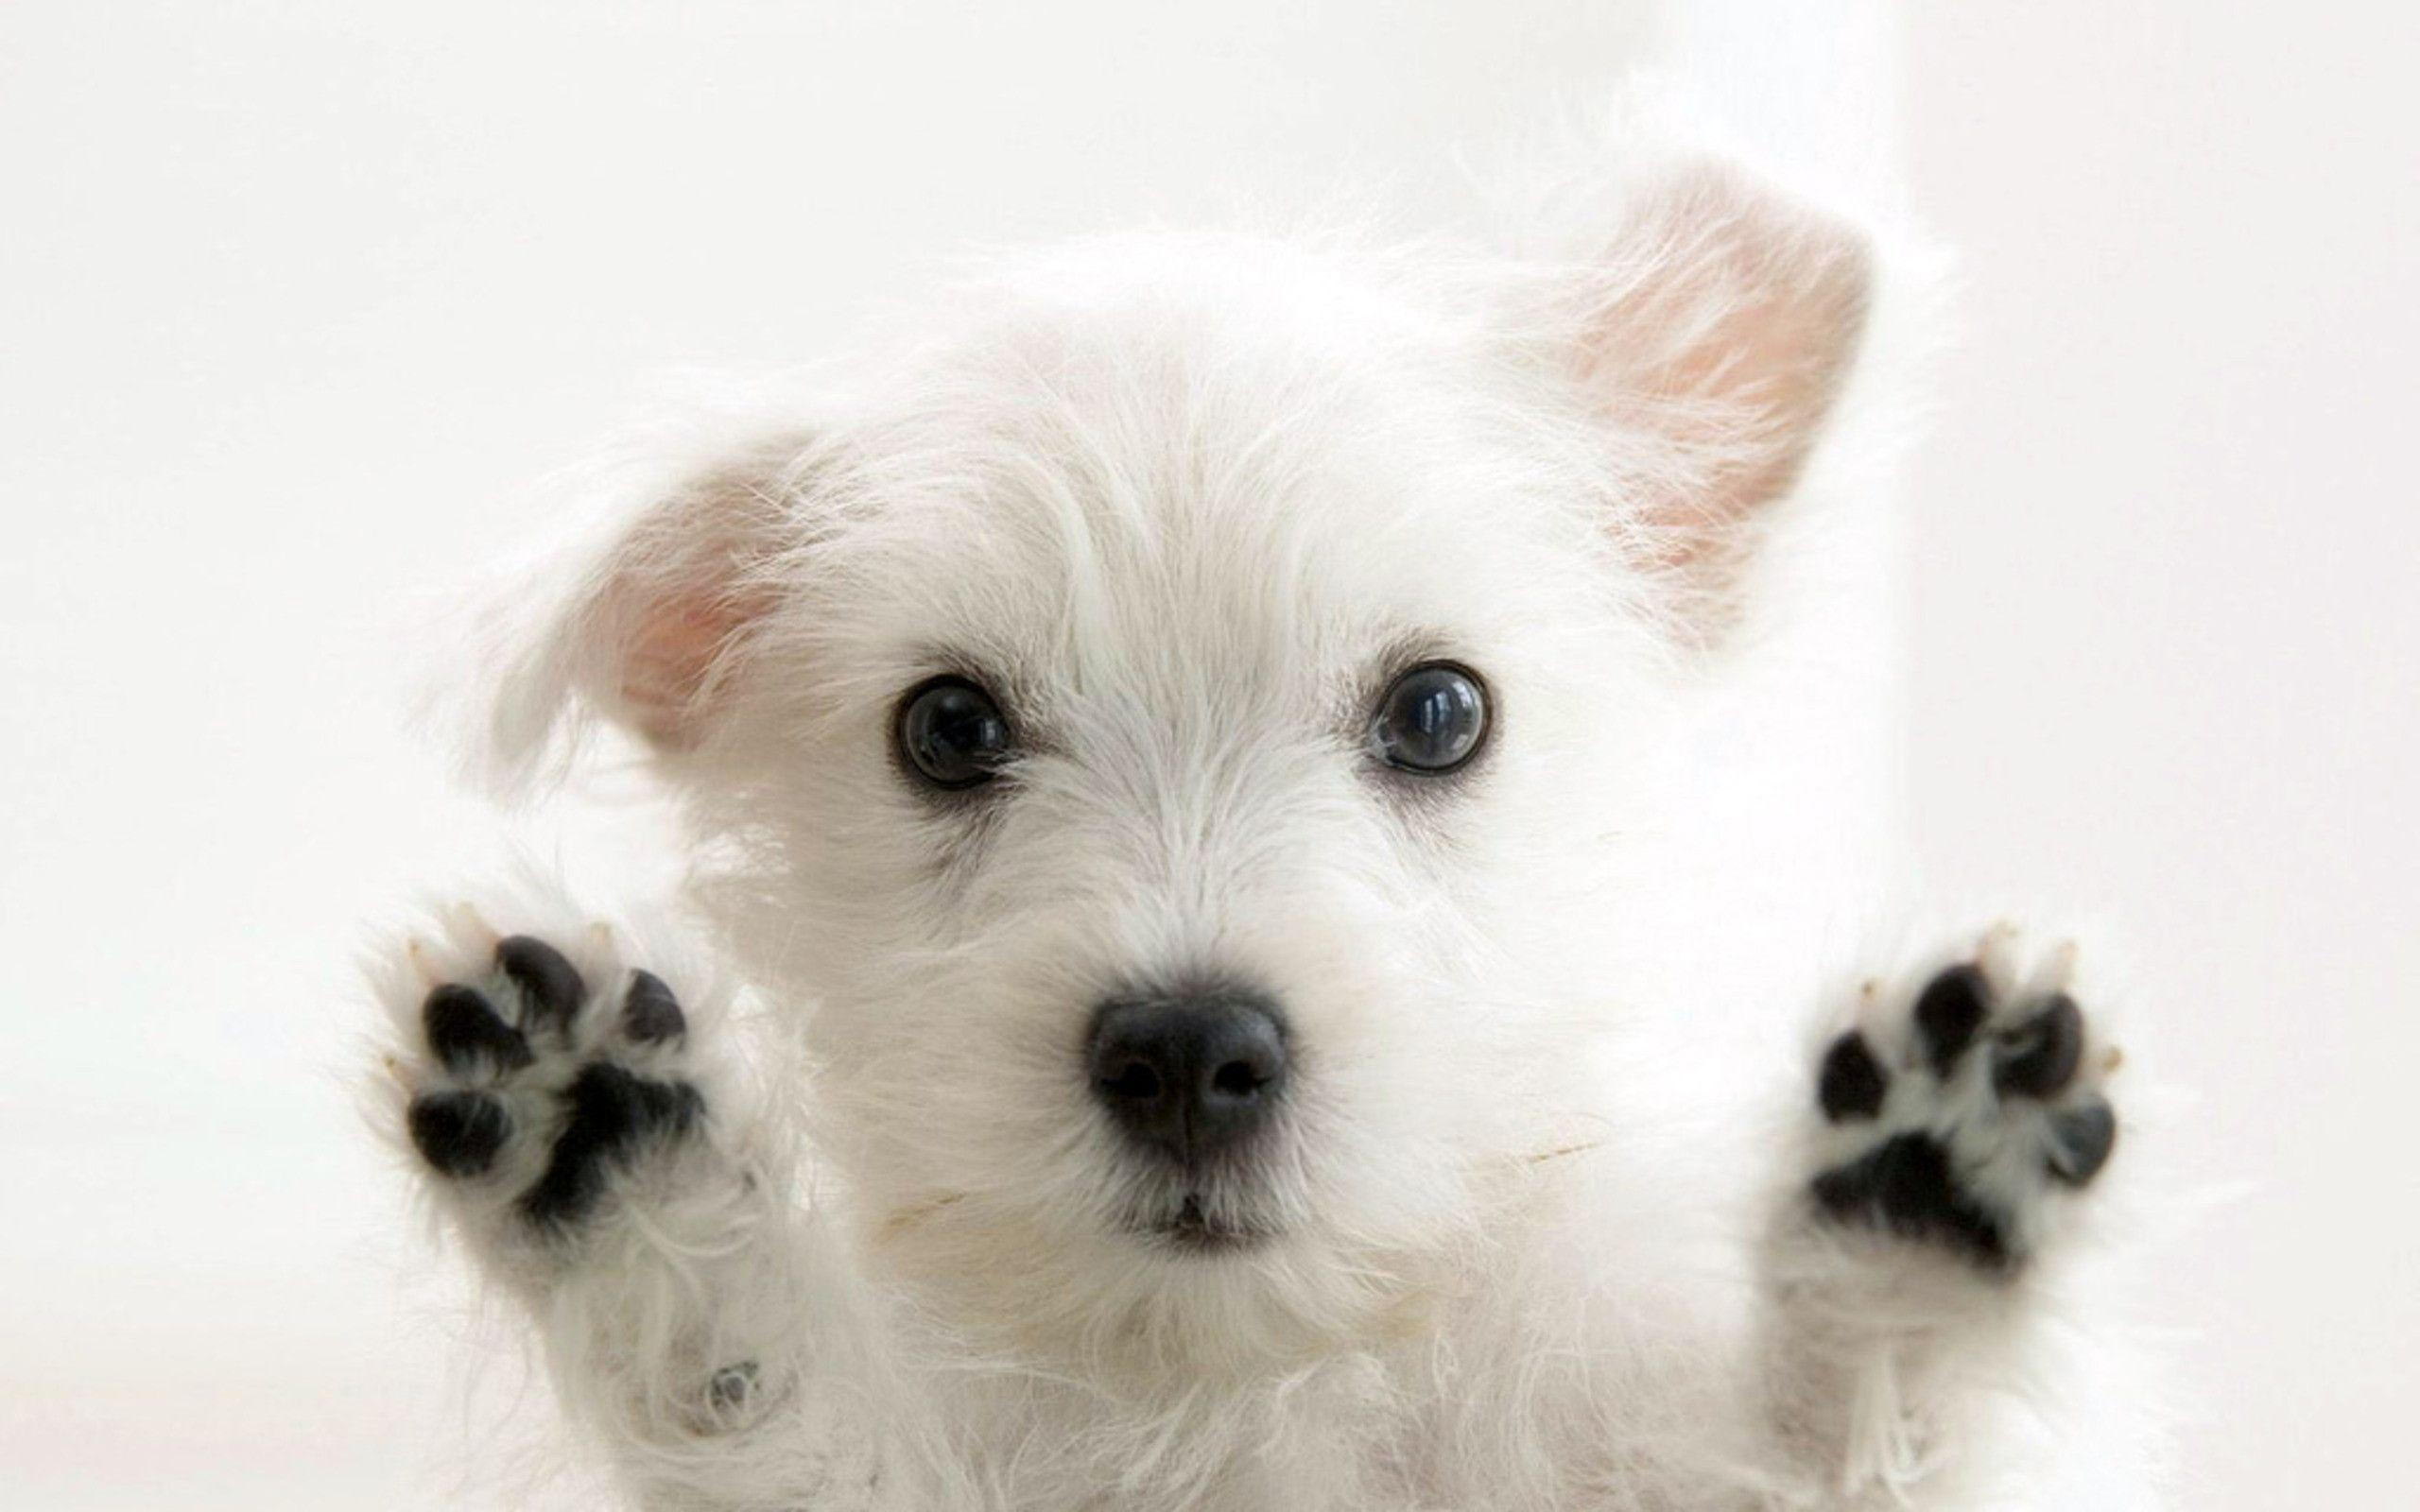 Puppy Wallpapers